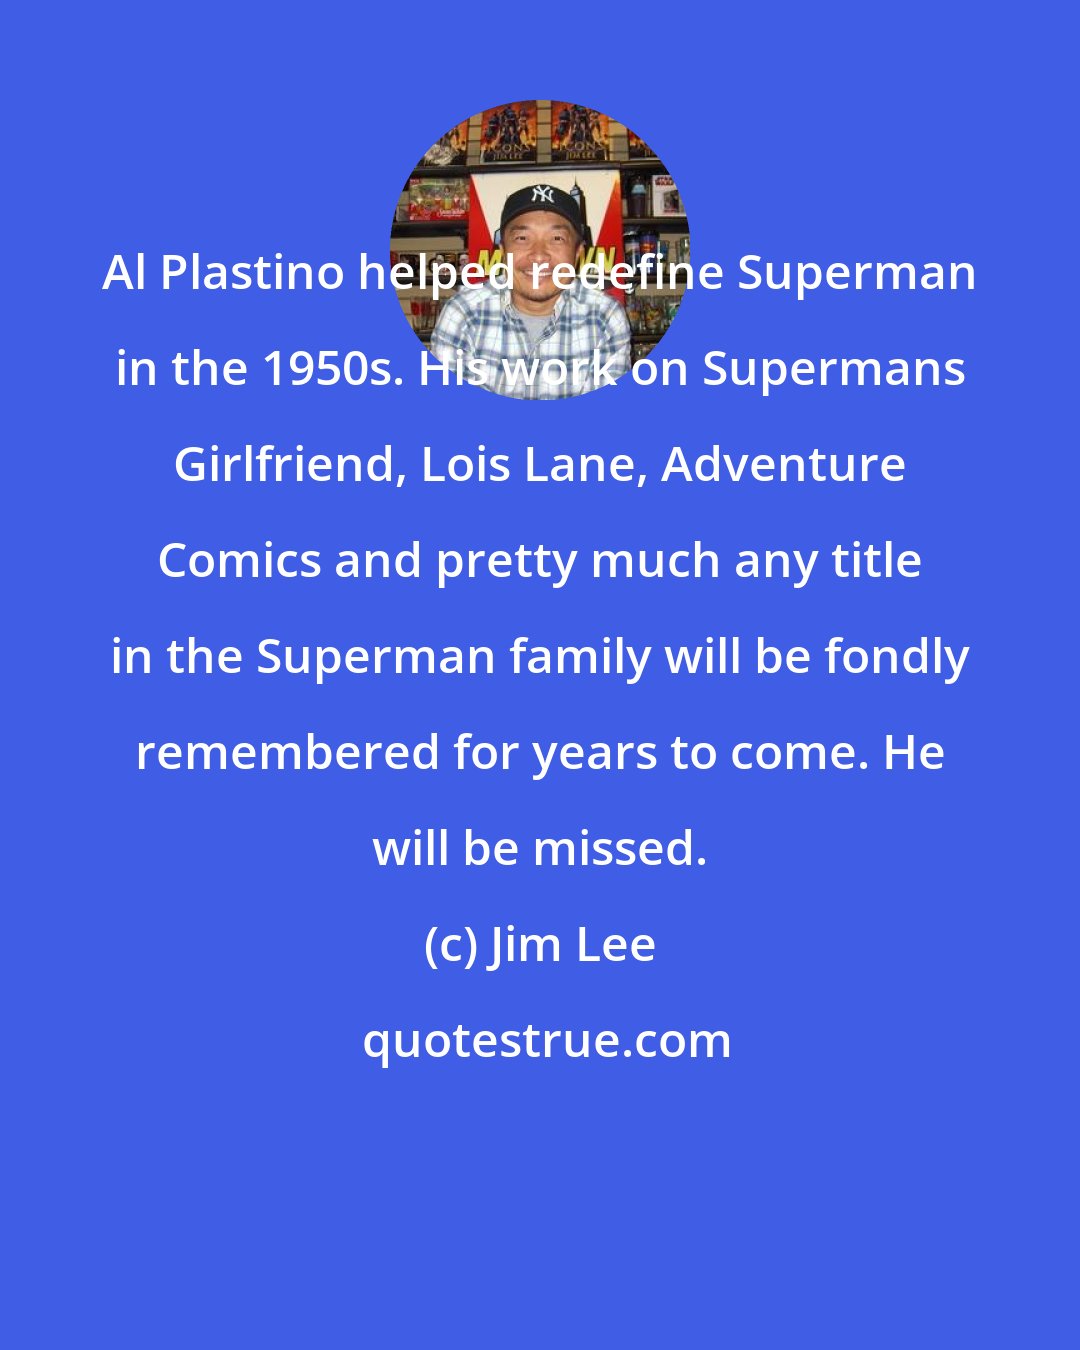 Jim Lee: Al Plastino helped redefine Superman in the 1950s. His work on Supermans Girlfriend, Lois Lane, Adventure Comics and pretty much any title in the Superman family will be fondly remembered for years to come. He will be missed.